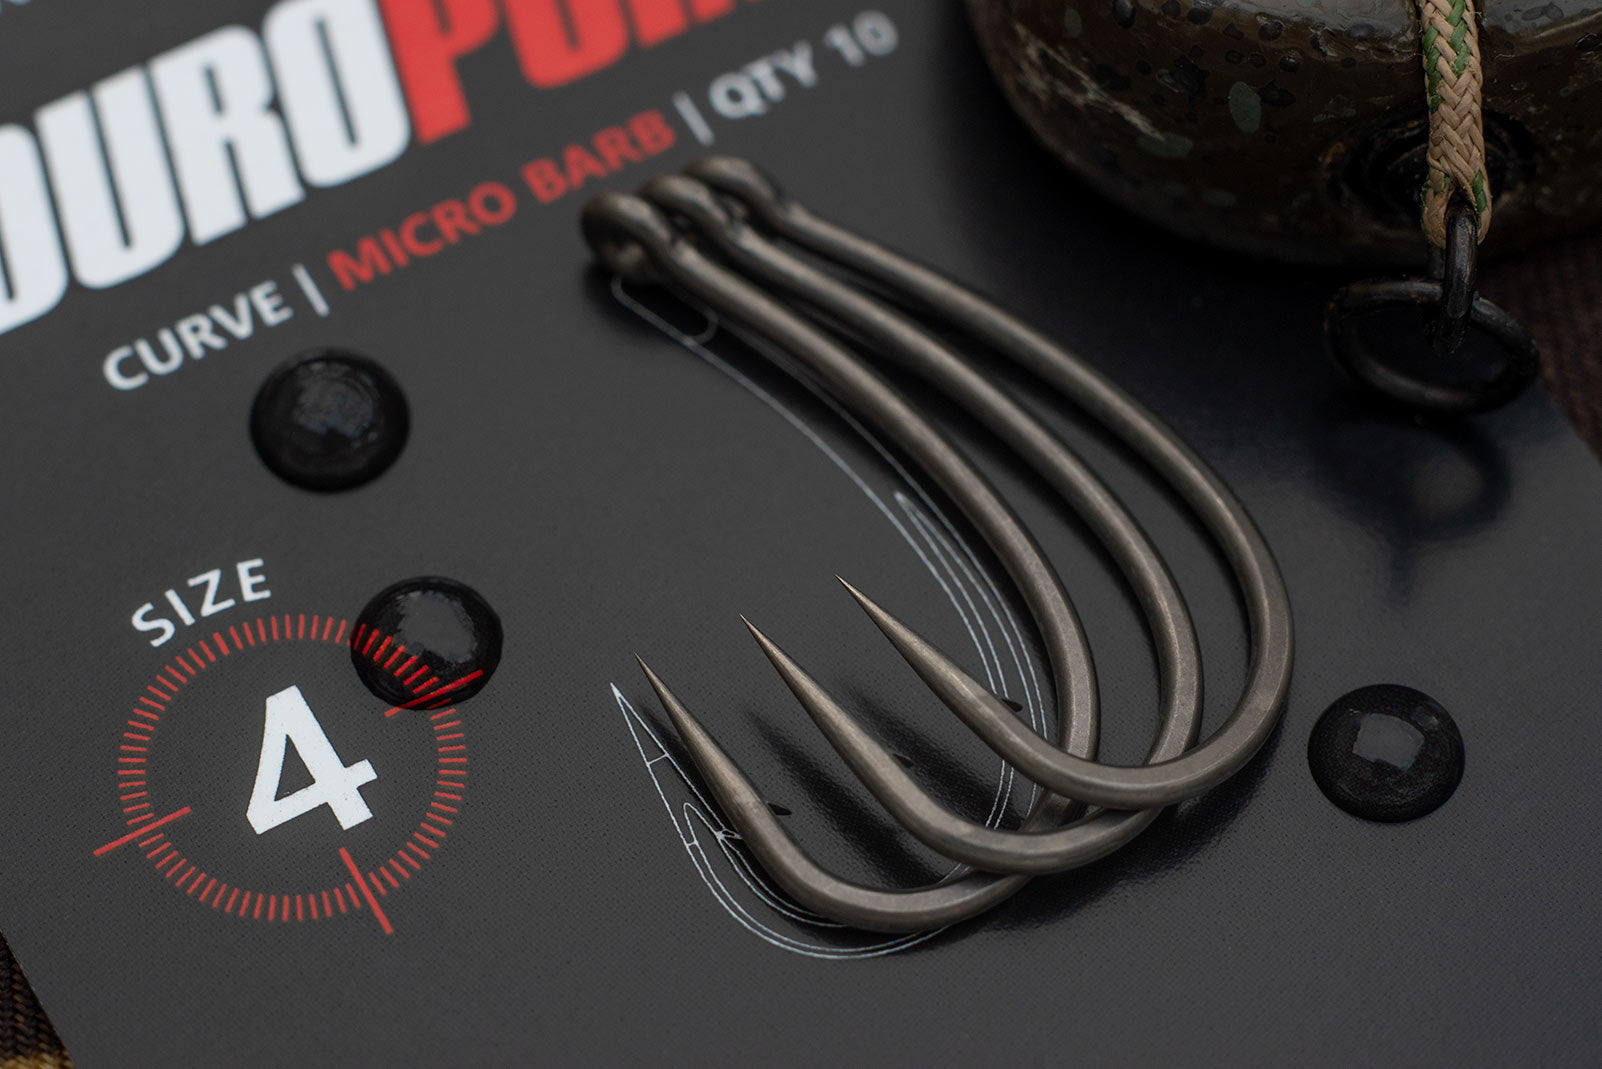 From the packet, three Pin sharp, Size 4 Duropoint Curve shank hooks, At Angling Iron we believe these are the most versatile carp hooks about and are perfect for D, Spinner or Ronnie and German Rigs.